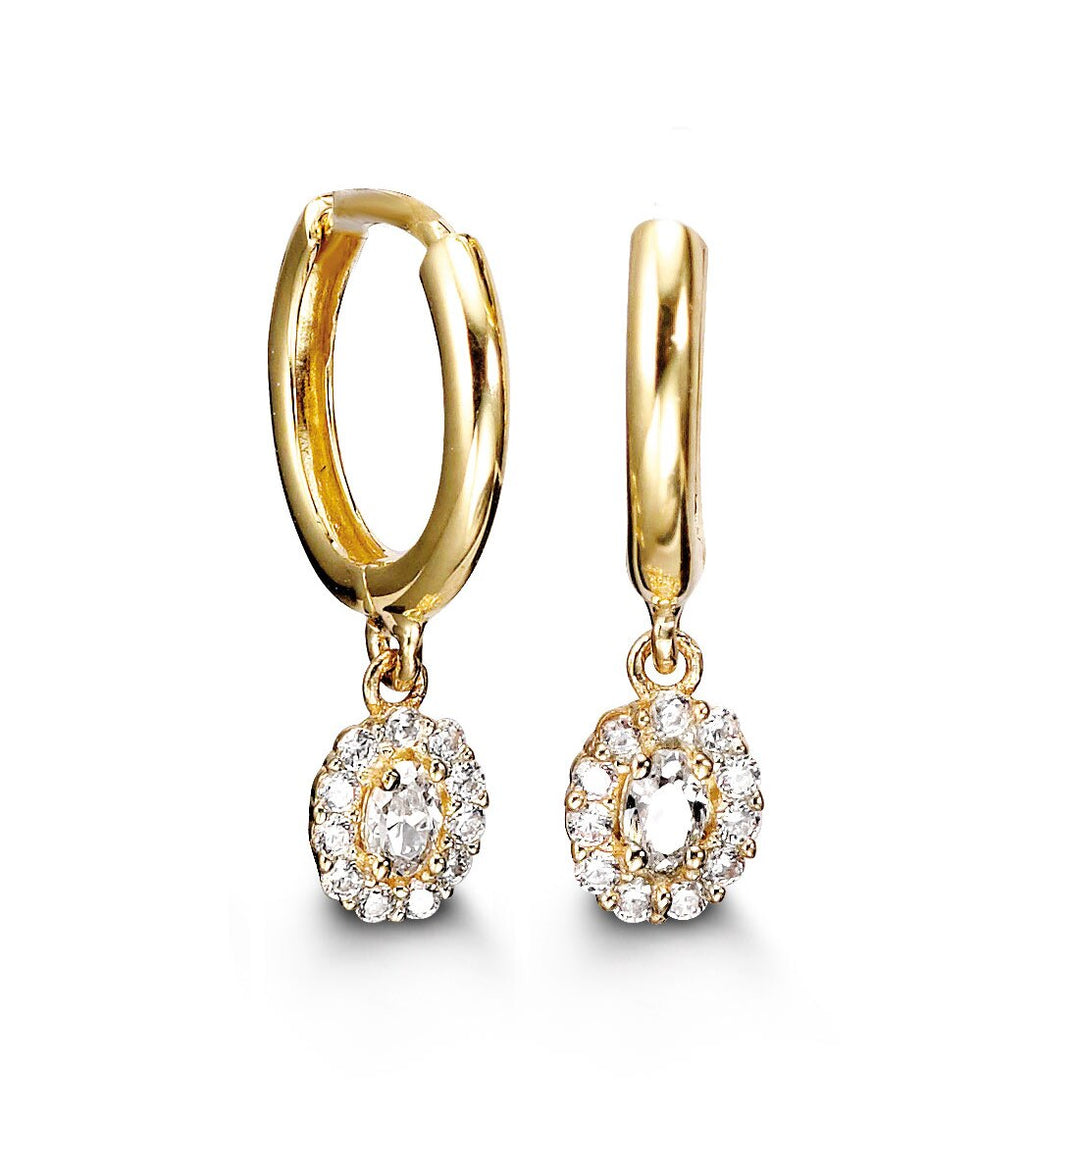 Classic 10K yellow gold huggie earrings featuring an oval cubic zirconia drop surrounded by a halo of sparkling stones, ideal for sophisticated styling.